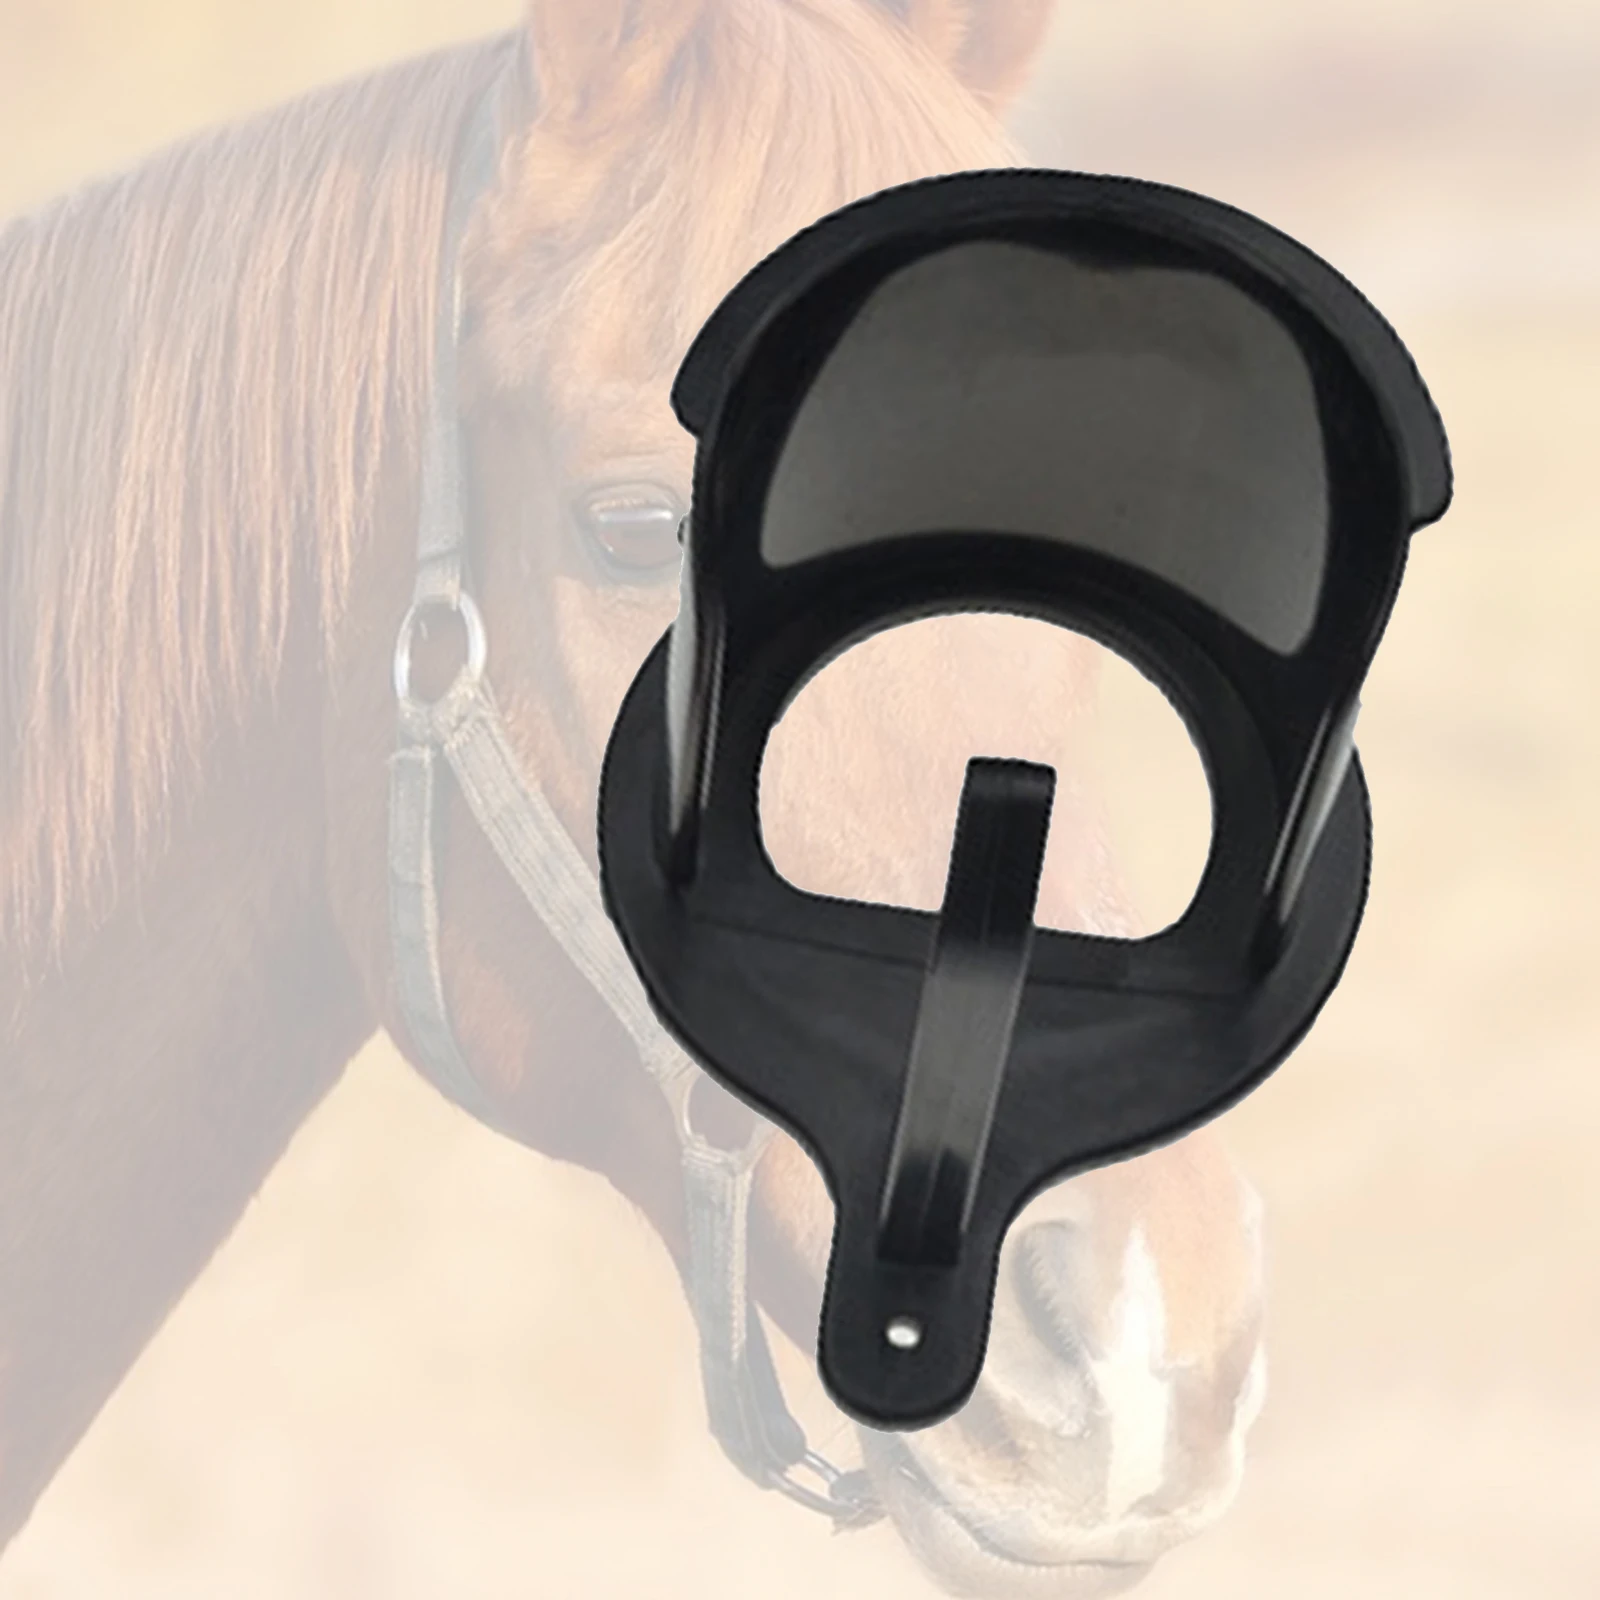 ABS Horse Bridle Hook Hanger Quality Plastic Rack Wall Mounted Harness Holder